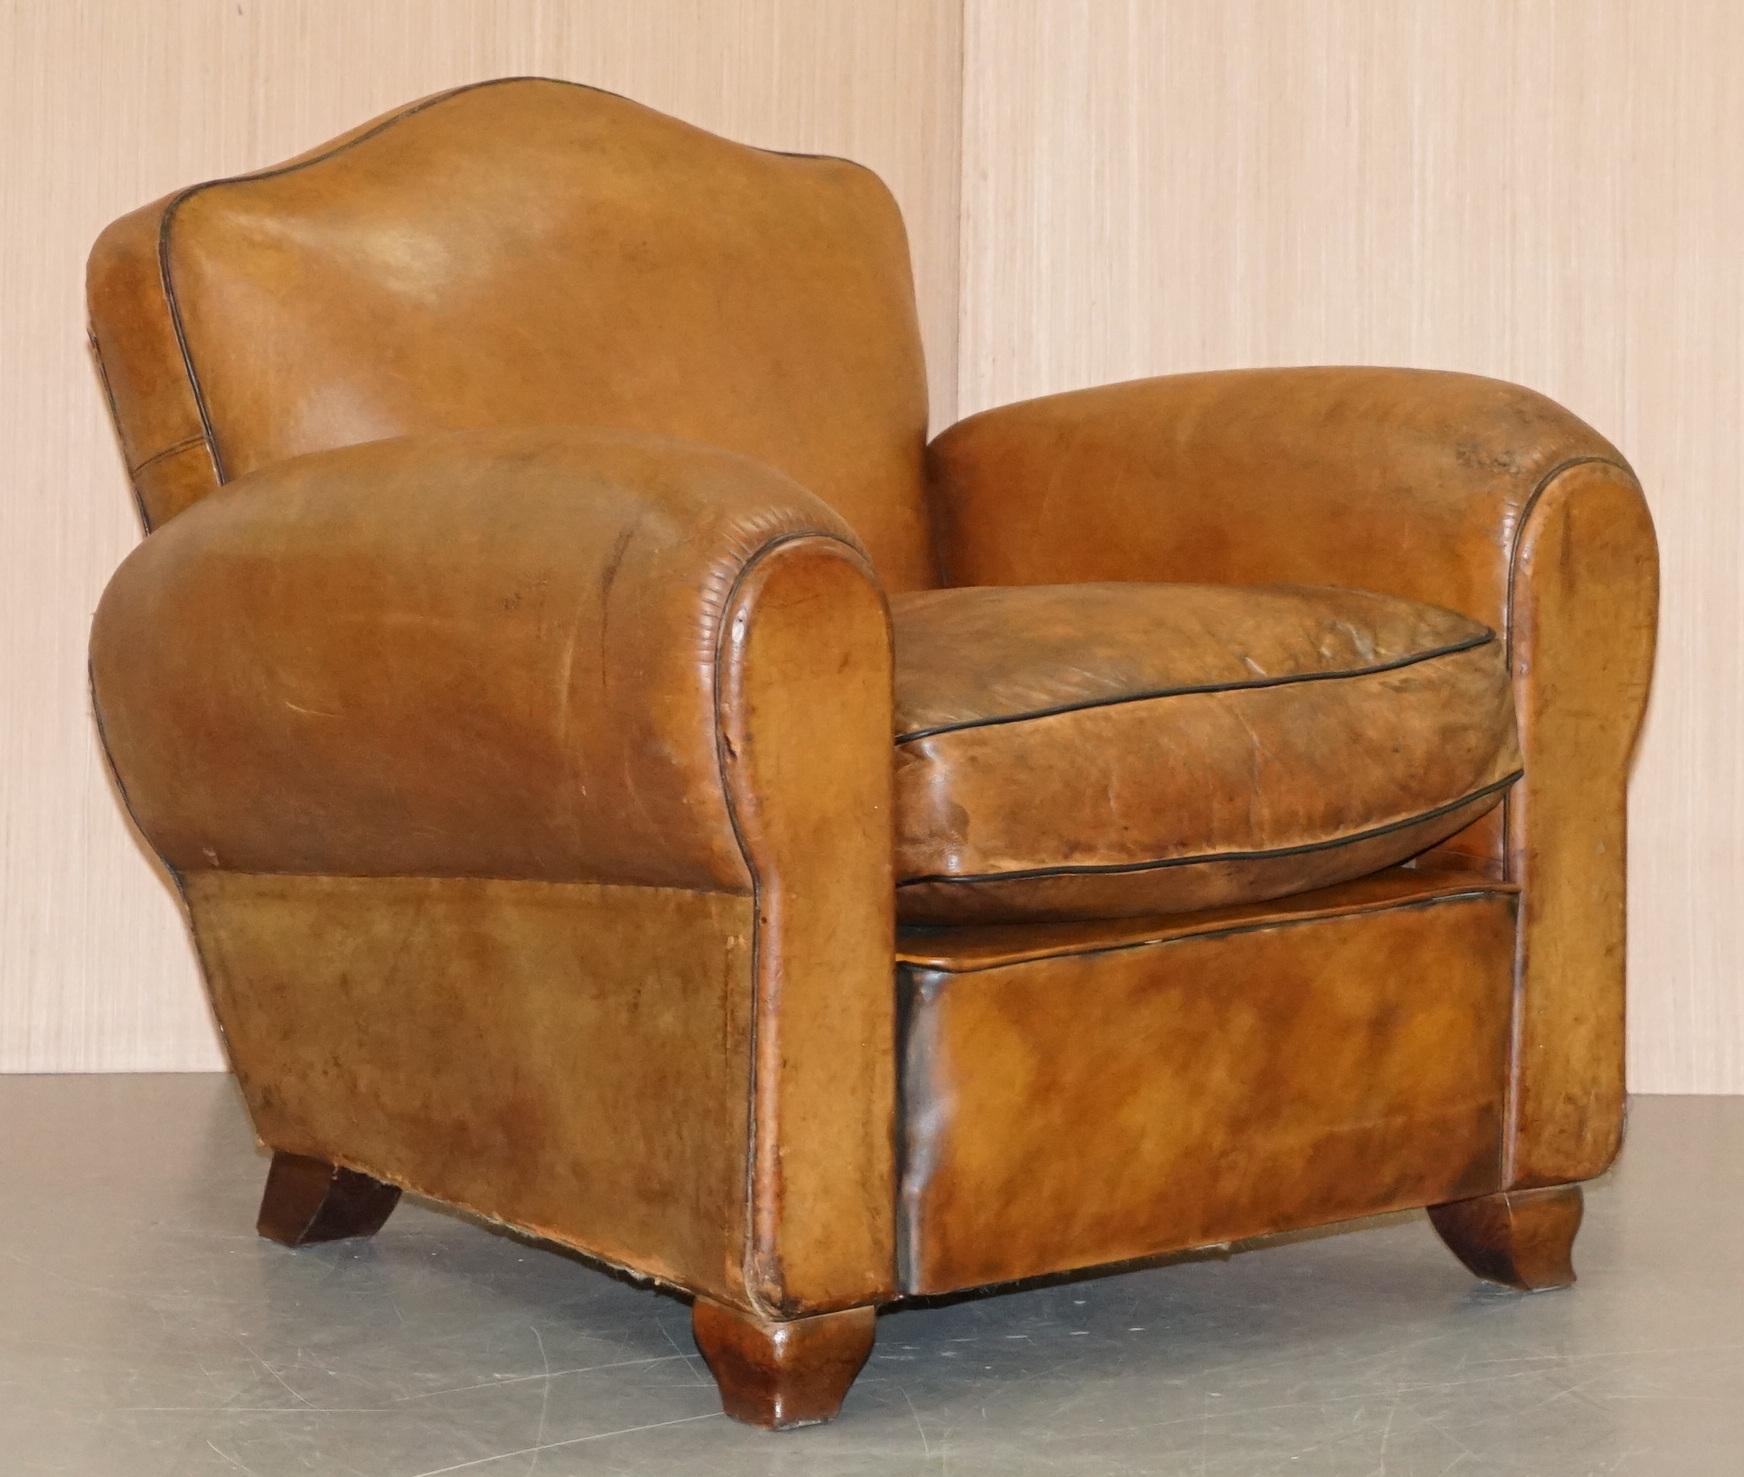 We are delighted to offer for sale this stunning pair of partially restored French circa 1890 brown leather club armchairs

An iconic pair, very stylish and almost totally original, the leather hide is the period upholstery which is rare for these